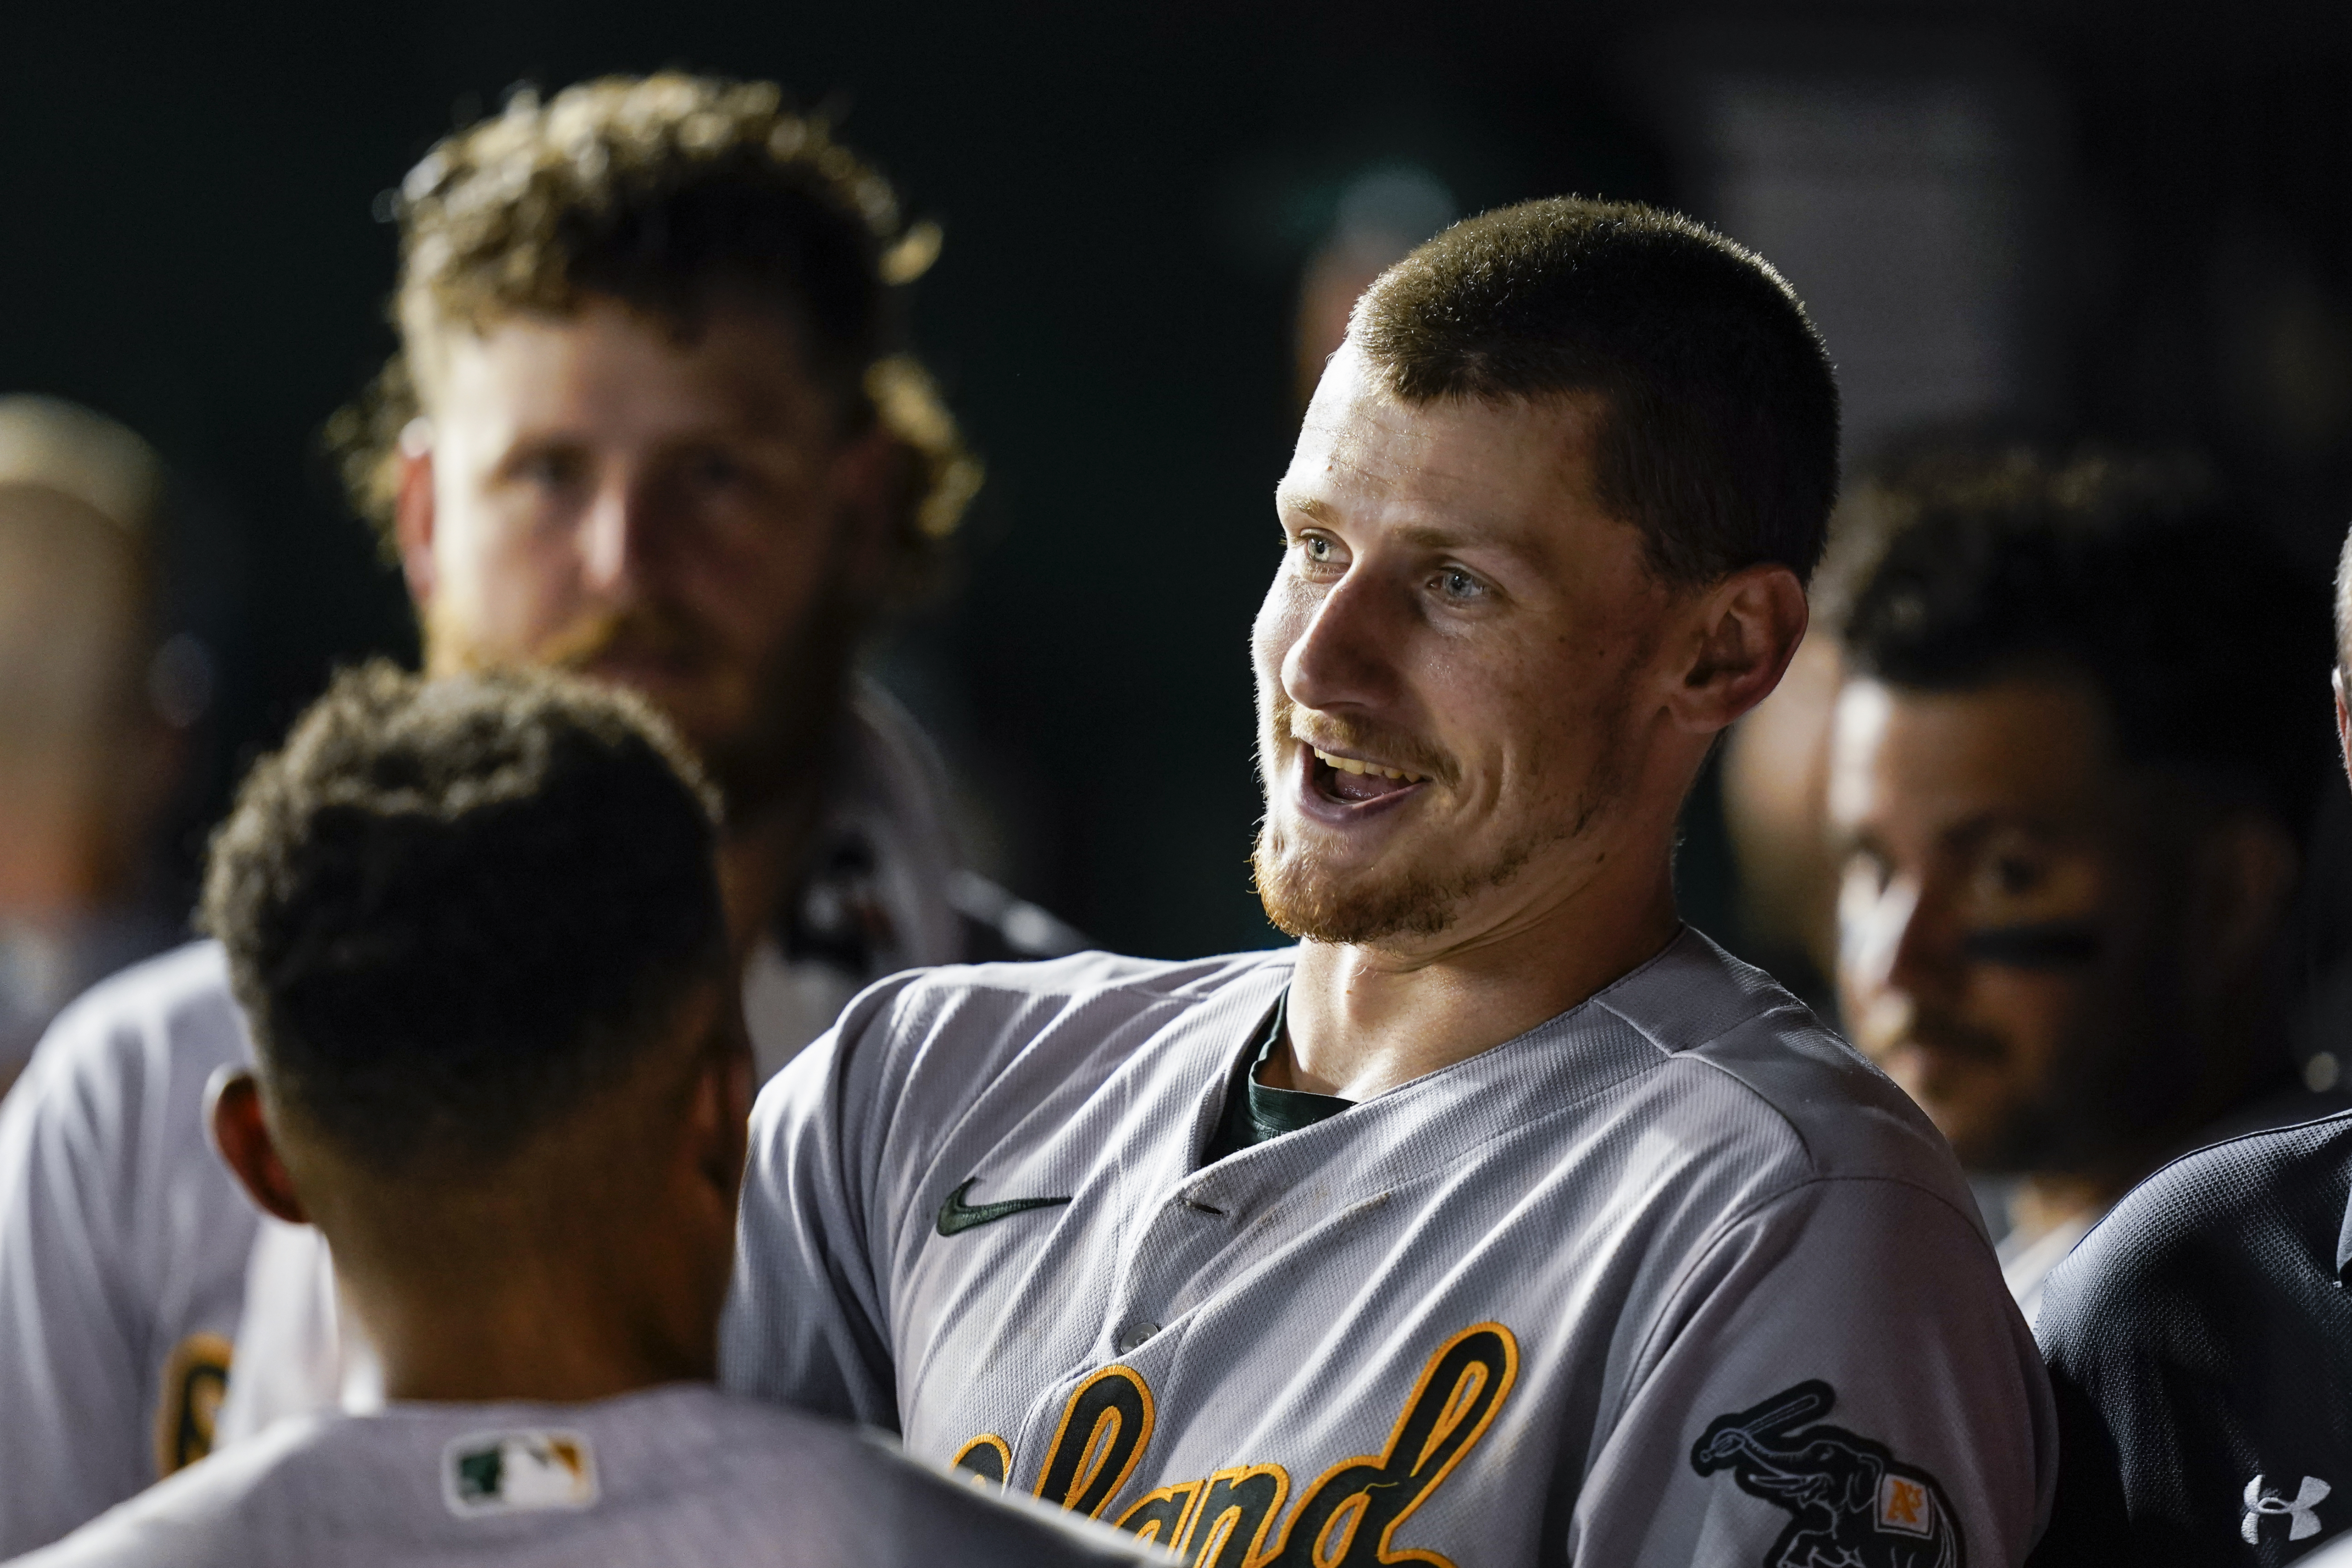 Centerville grad, former Wright State standout Murphy traded to Braves